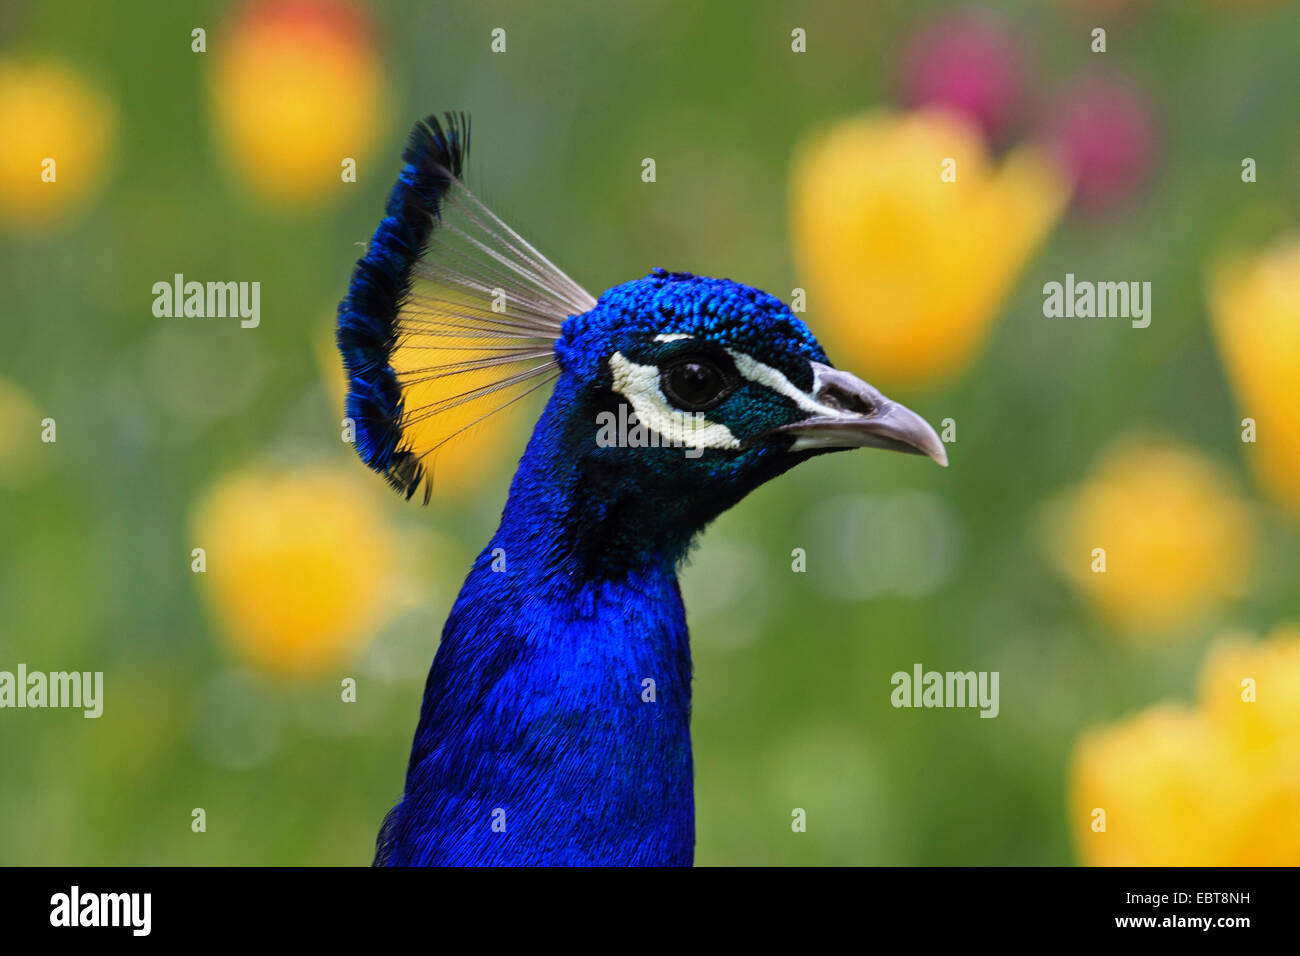 common peafowl (Pavo cristatus), lateral portrait of a male in front of a flower bed Stock Photo